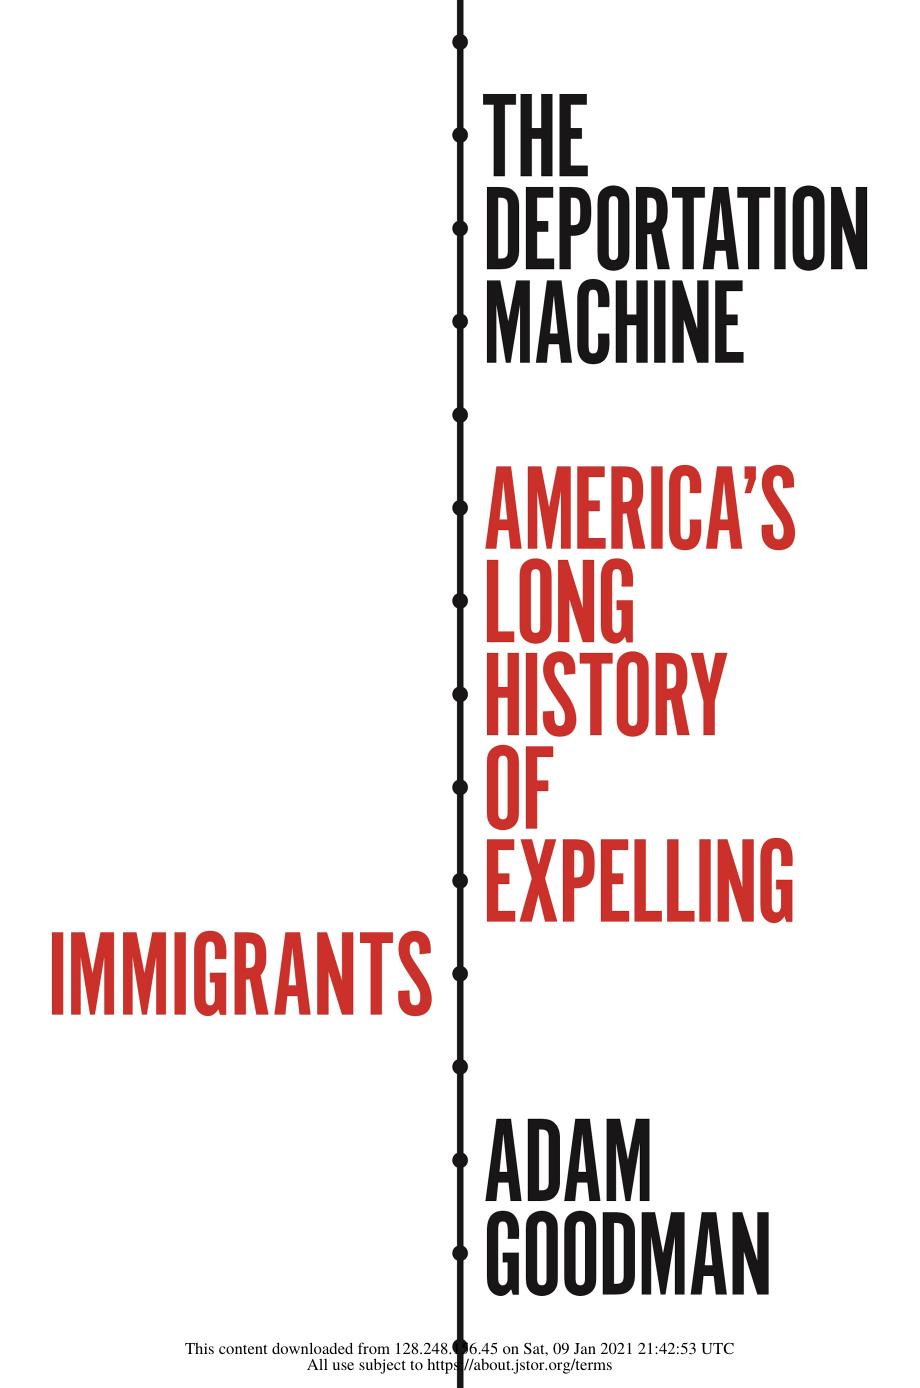 The Deportation Machine: America's Long History of Expelling Immigrants by Adam Goodman